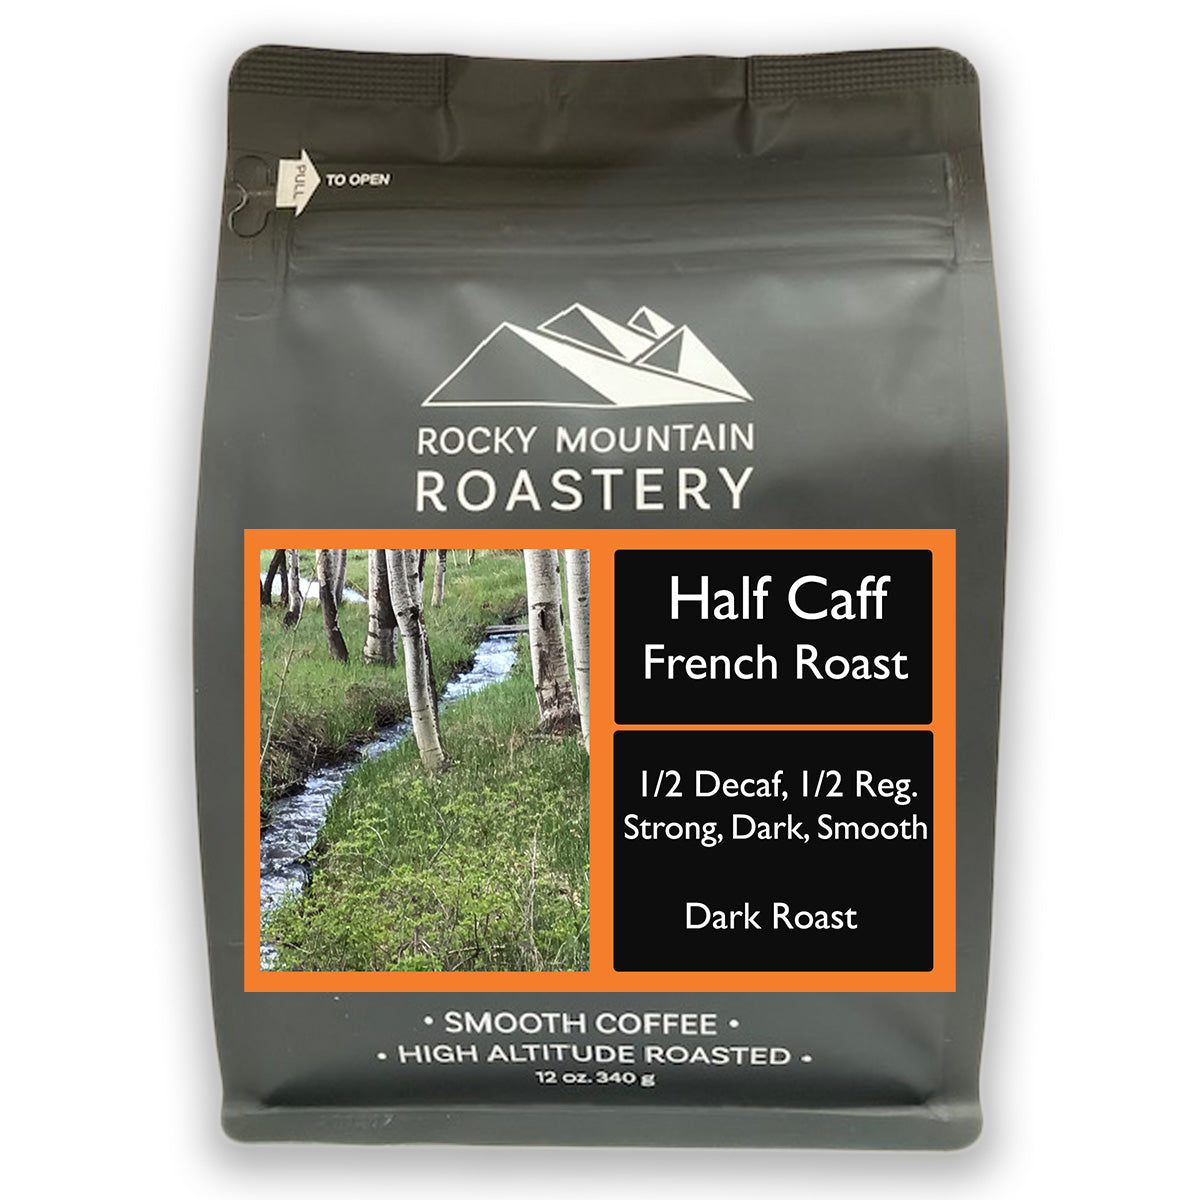 Picture of a bag of 1/2 Caf French Roast Coffee